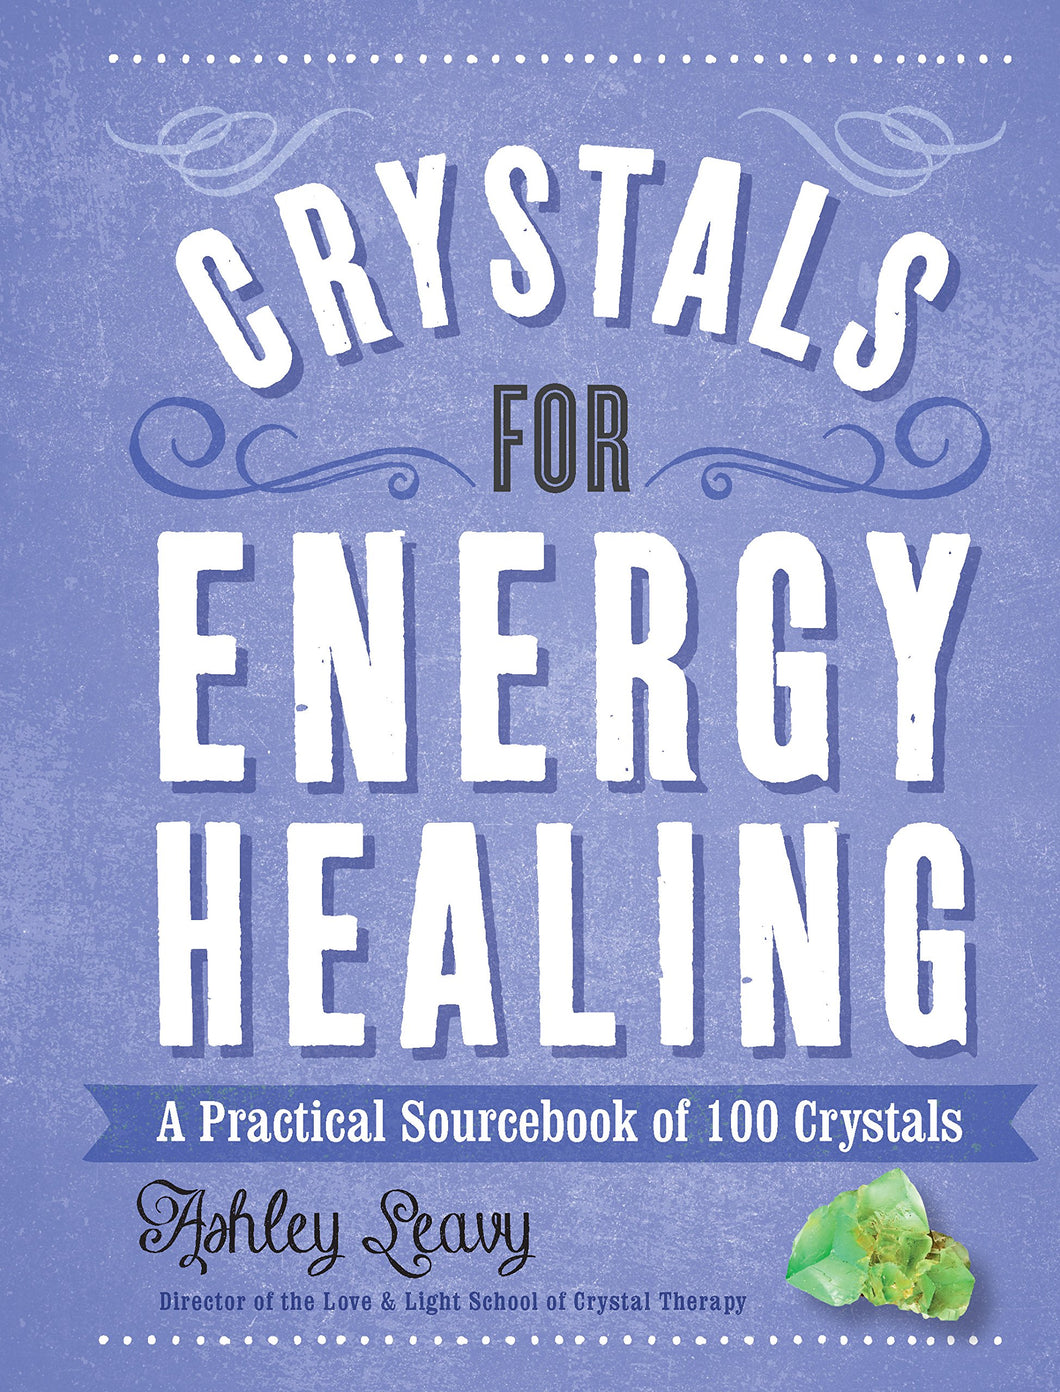 Crystals for Energy Healing: A Practical Sourcebook of 100 Crystals (Hardcover)